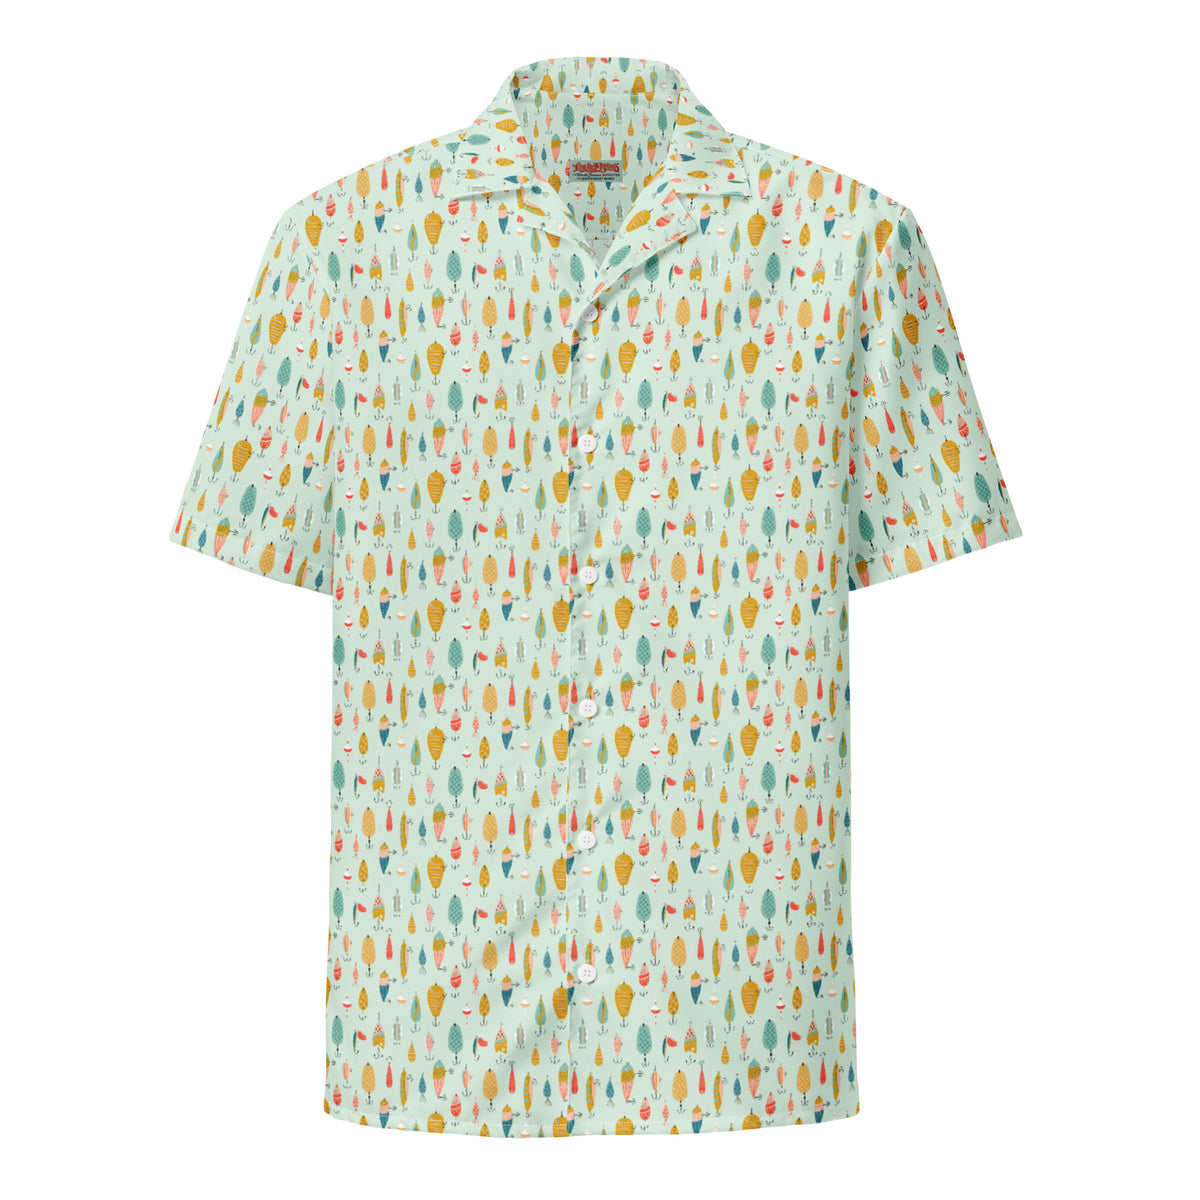 Bait and Tackle Button Up Shirt